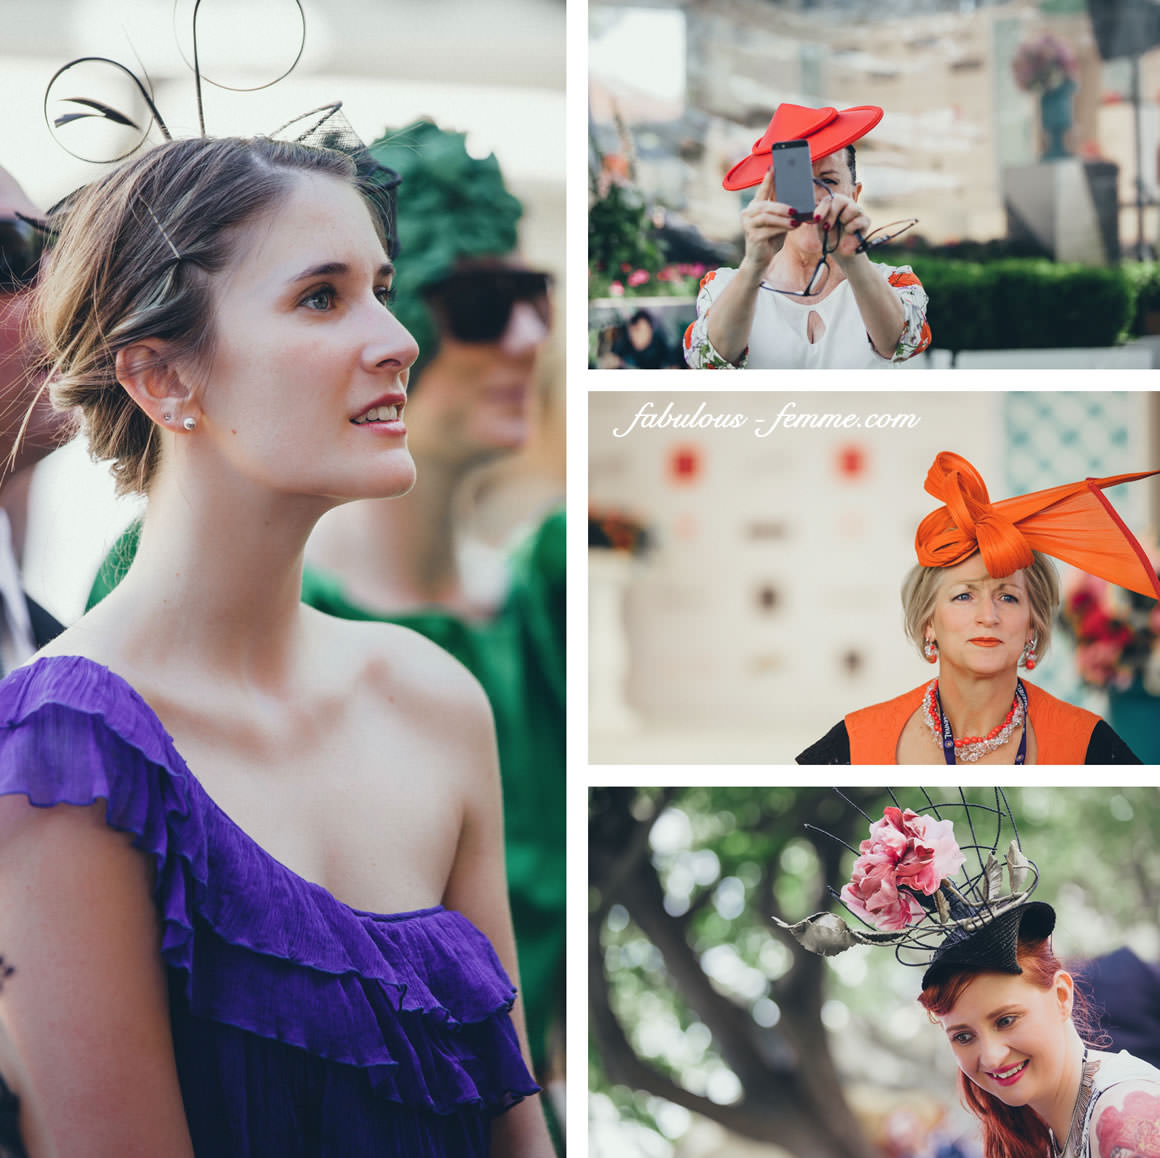 events in melbourne - spring racing carnival - trends